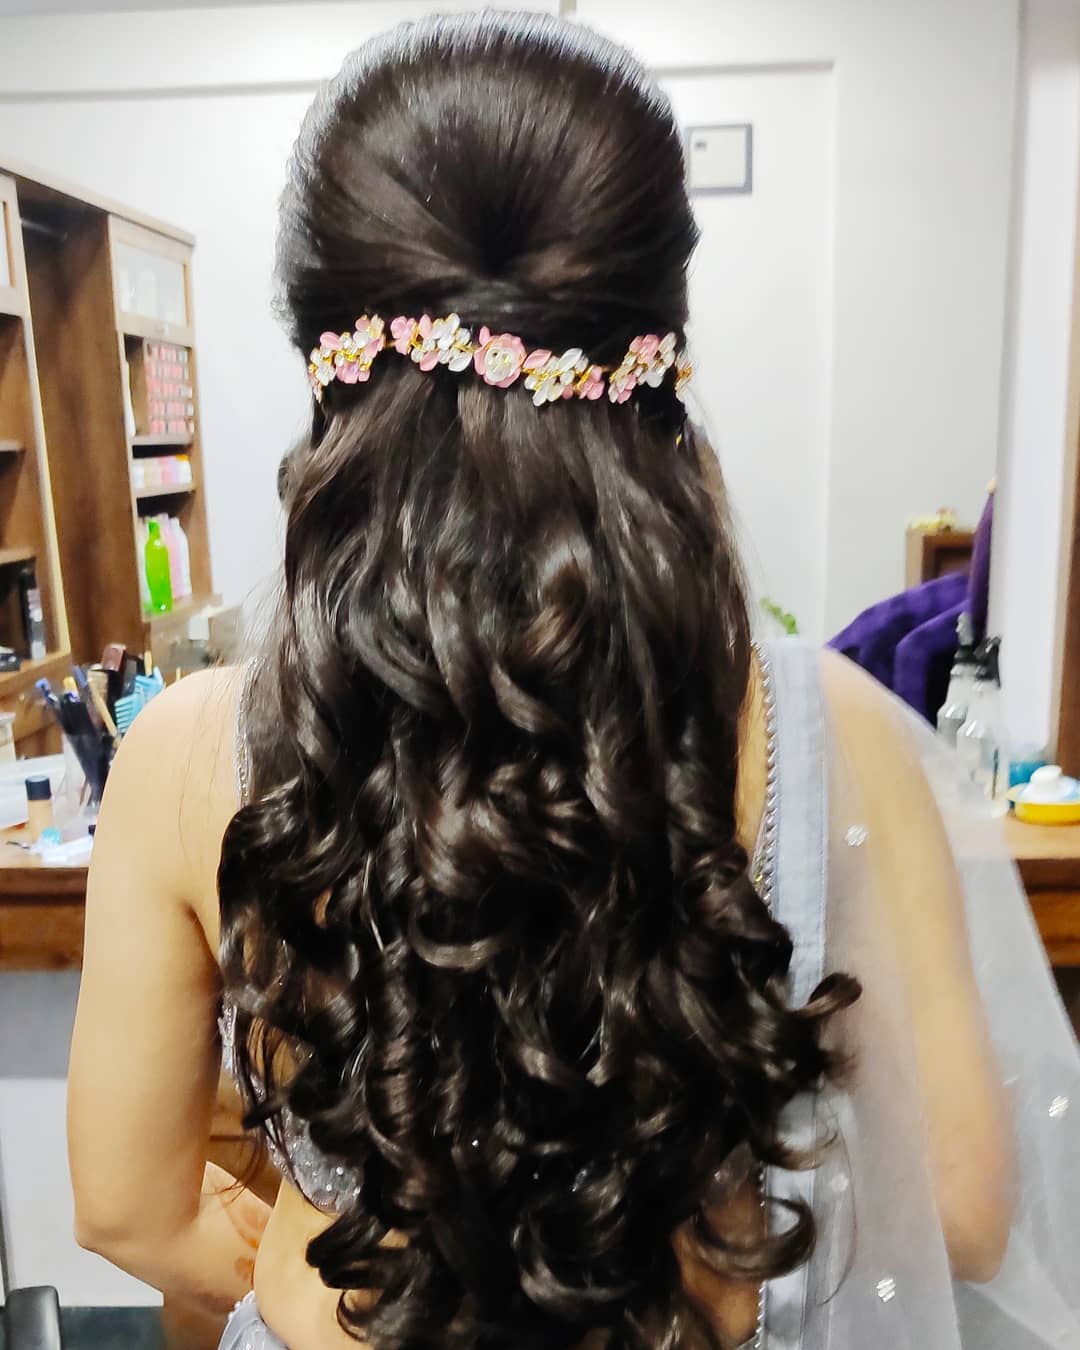 Long Curly Hair with Headpiece